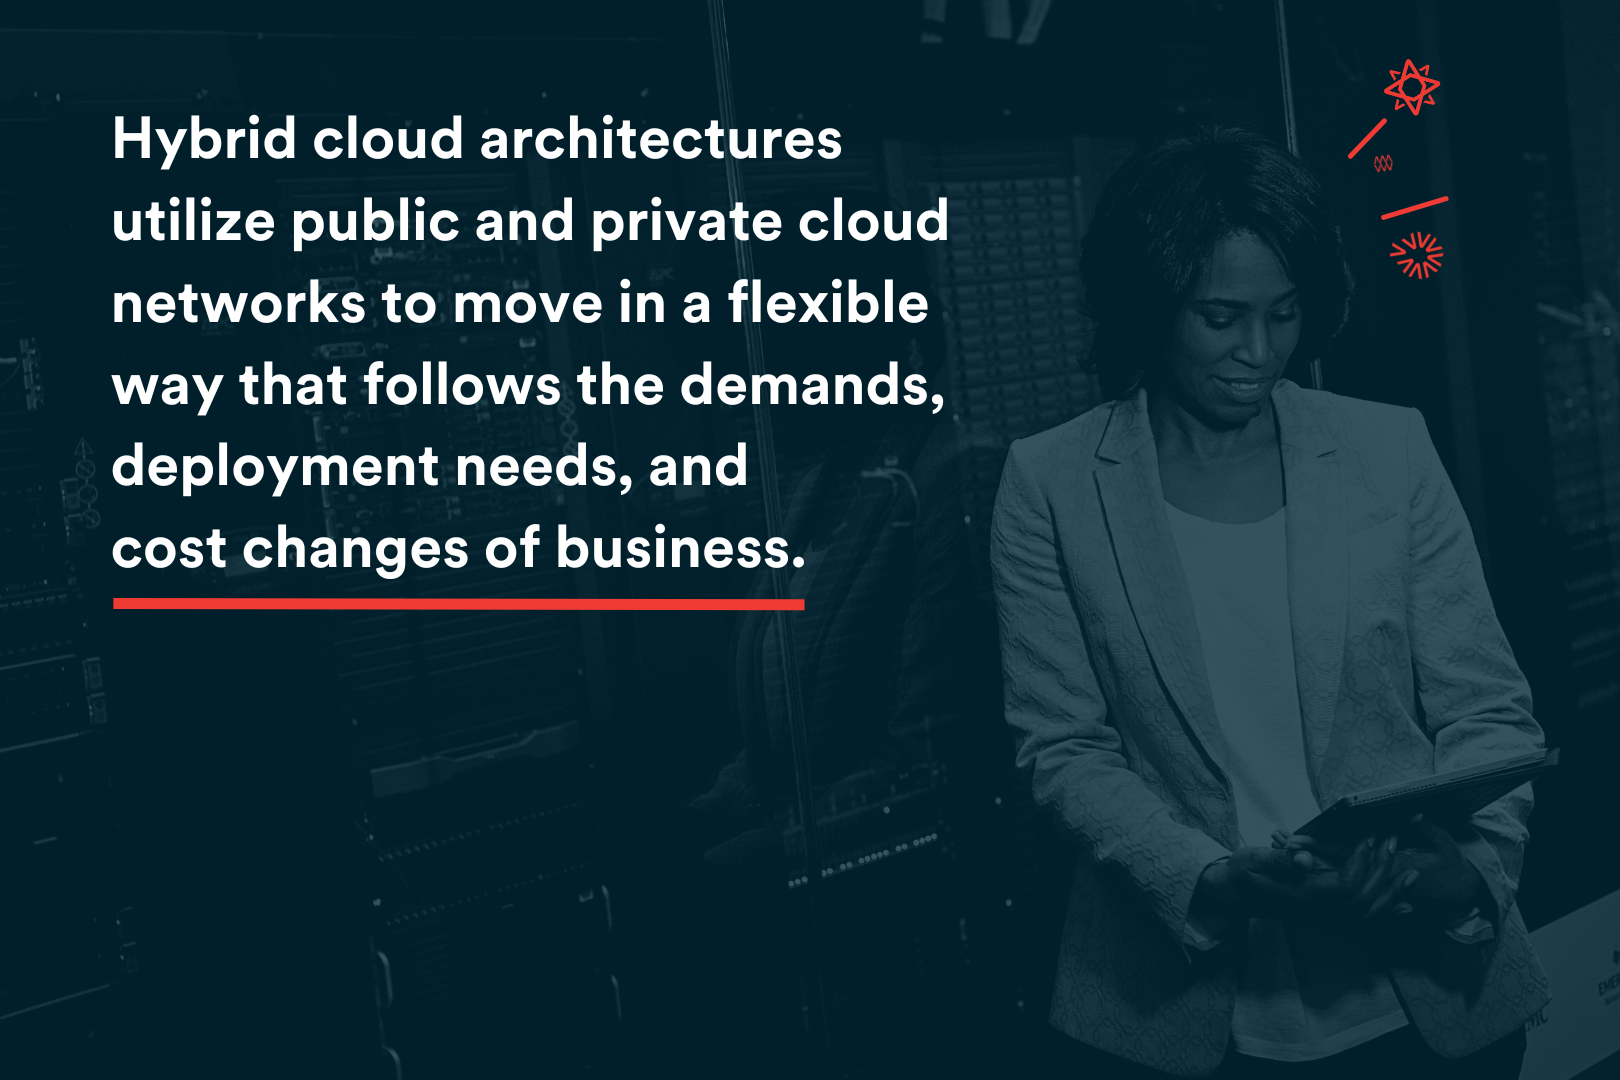 In Blog Image - Hybrid cloud architectures  utilize public and private cloud  networks to move in a flexible  way that follows the demands, deployment needs, and cost changes of business.